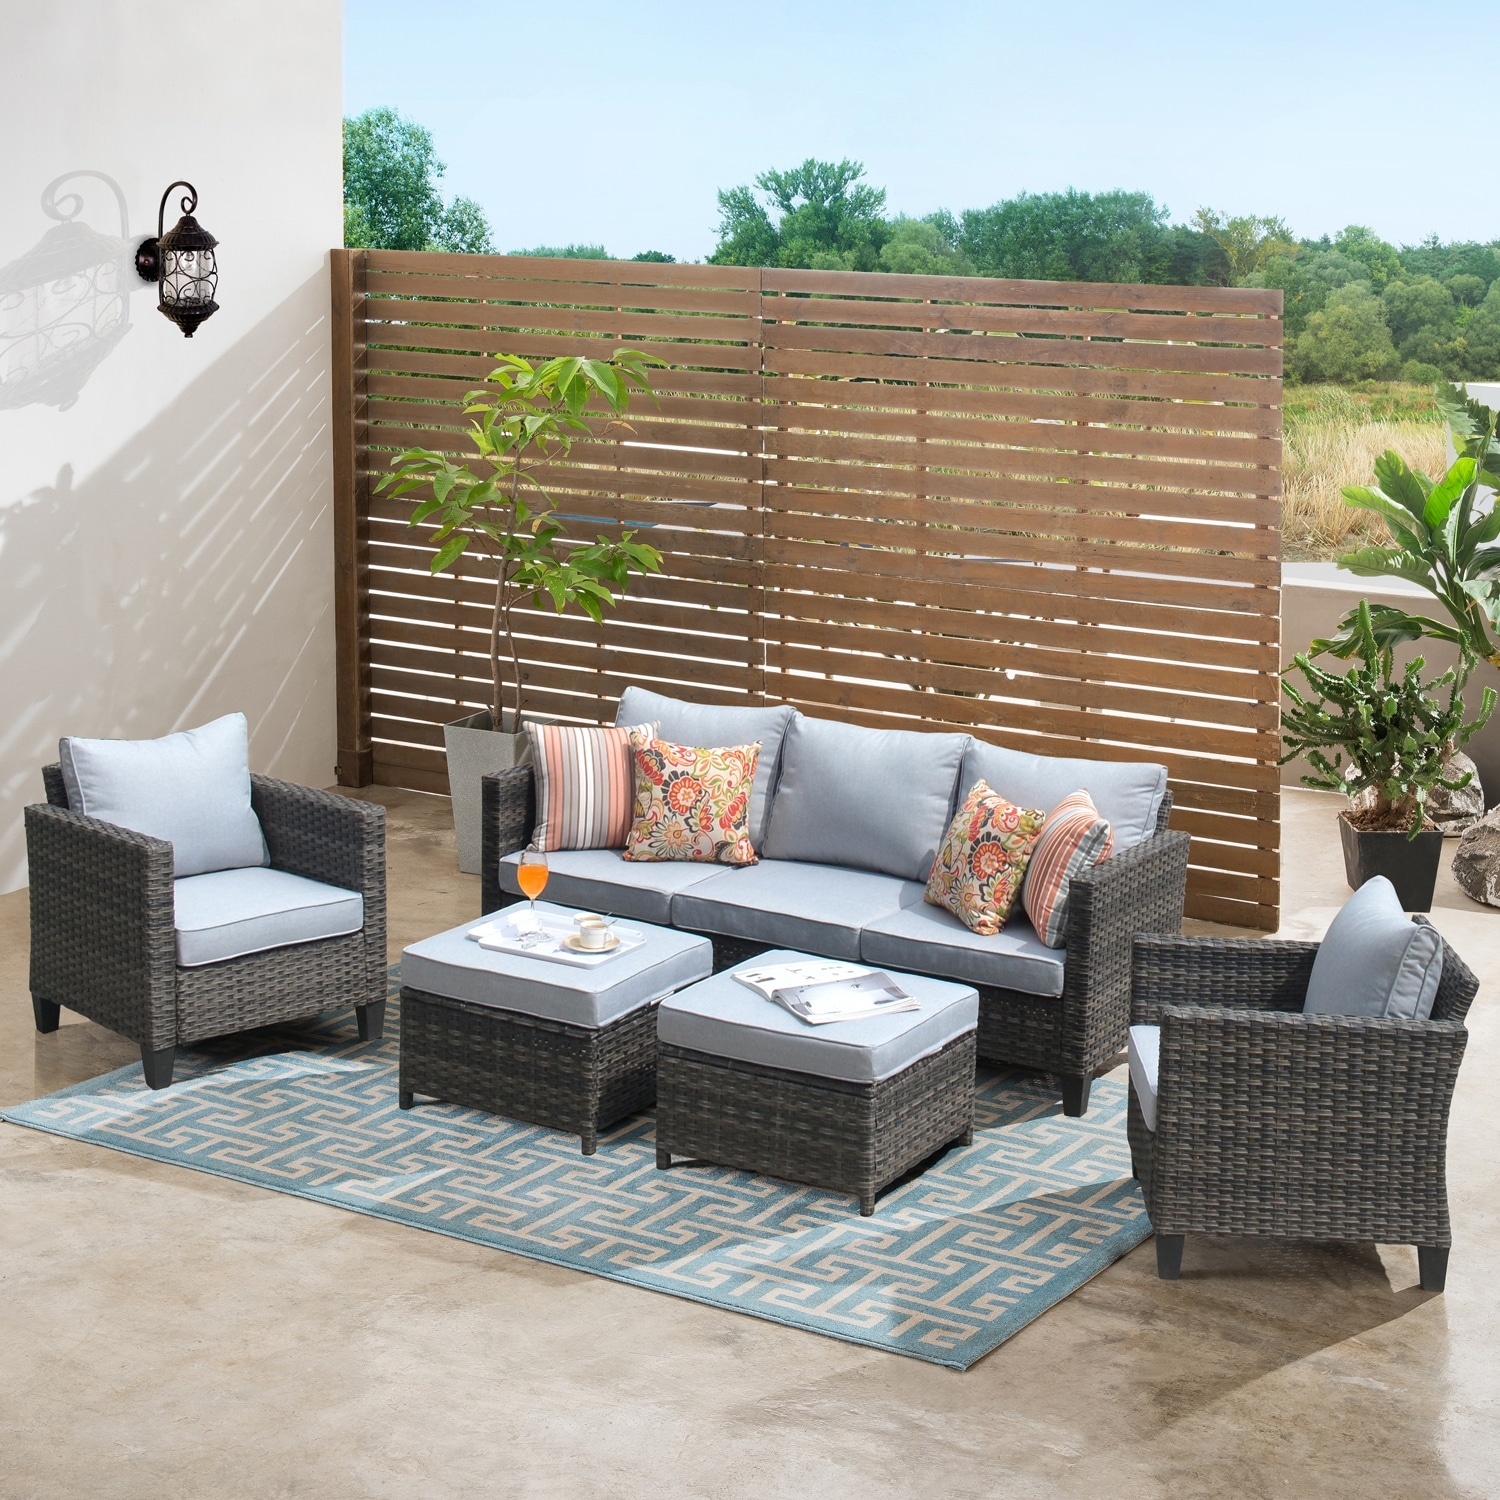 Ovios 5-piece Outdoor High-back Wicker Patio Sectional Set